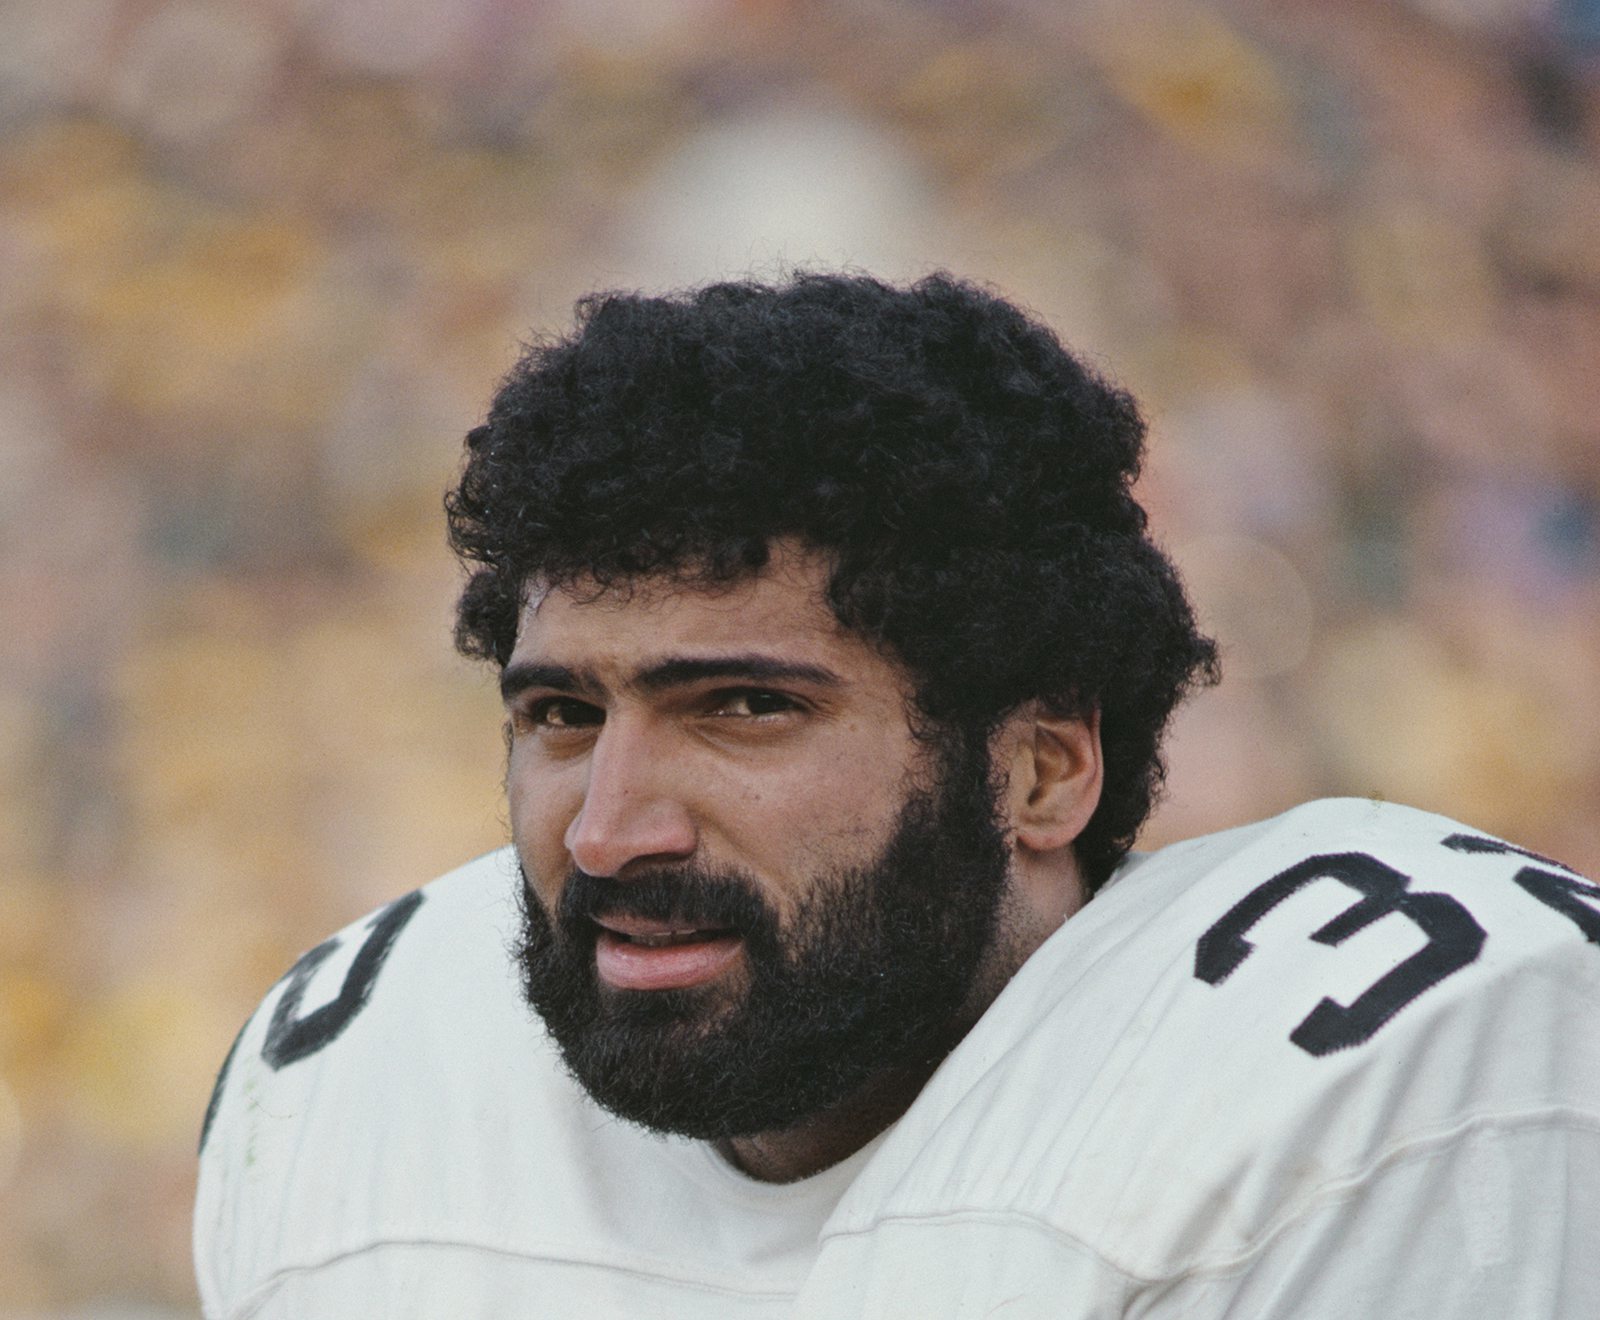 Photos: Steelers great Franco Harris through the years